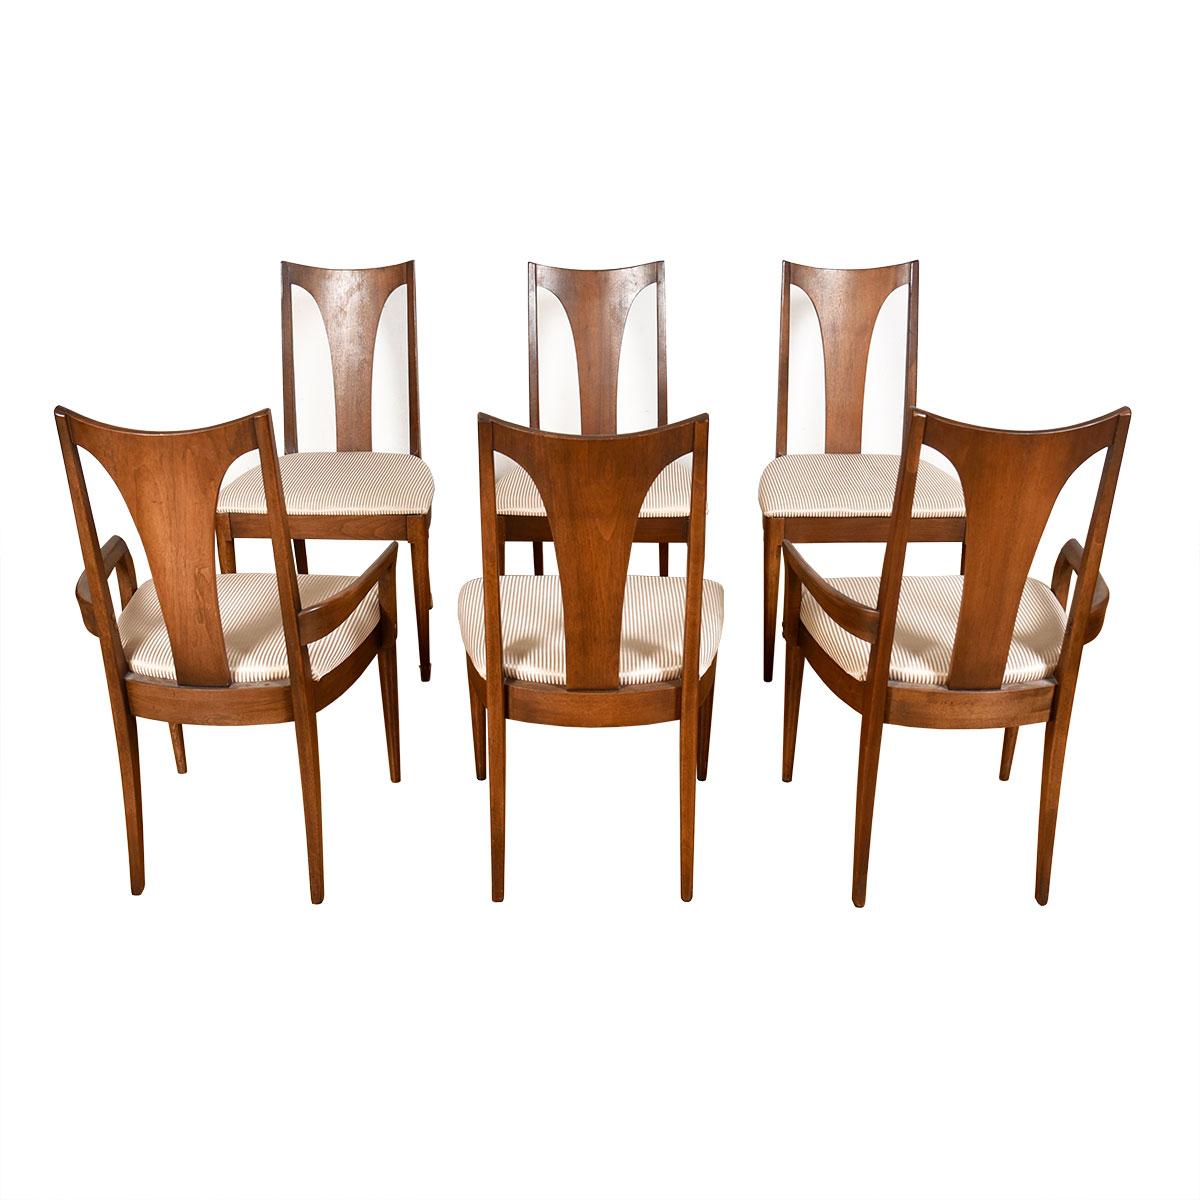 Set of 6 (2 Arm + 4 Side) Broyhill Brasilia Walnut Dining Chairs

Additional information:
Material: Upholstery
This is a set of 6 Broyhill Brasilia chairs in the second model that was issued having a central panel of walnut on the backrest and